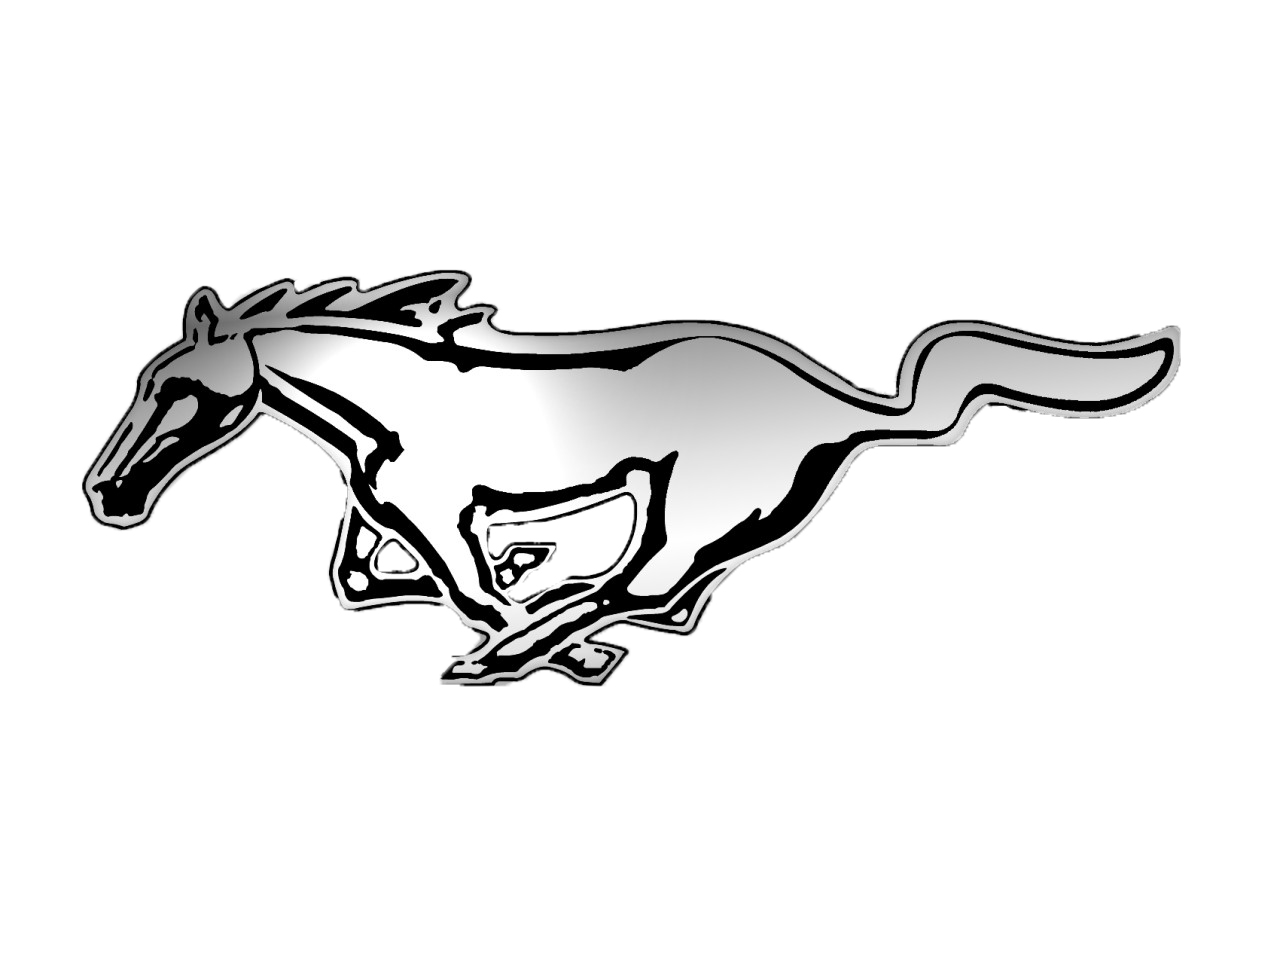 Ford Mustang Symbol Outline Images  Pictures - Becuo